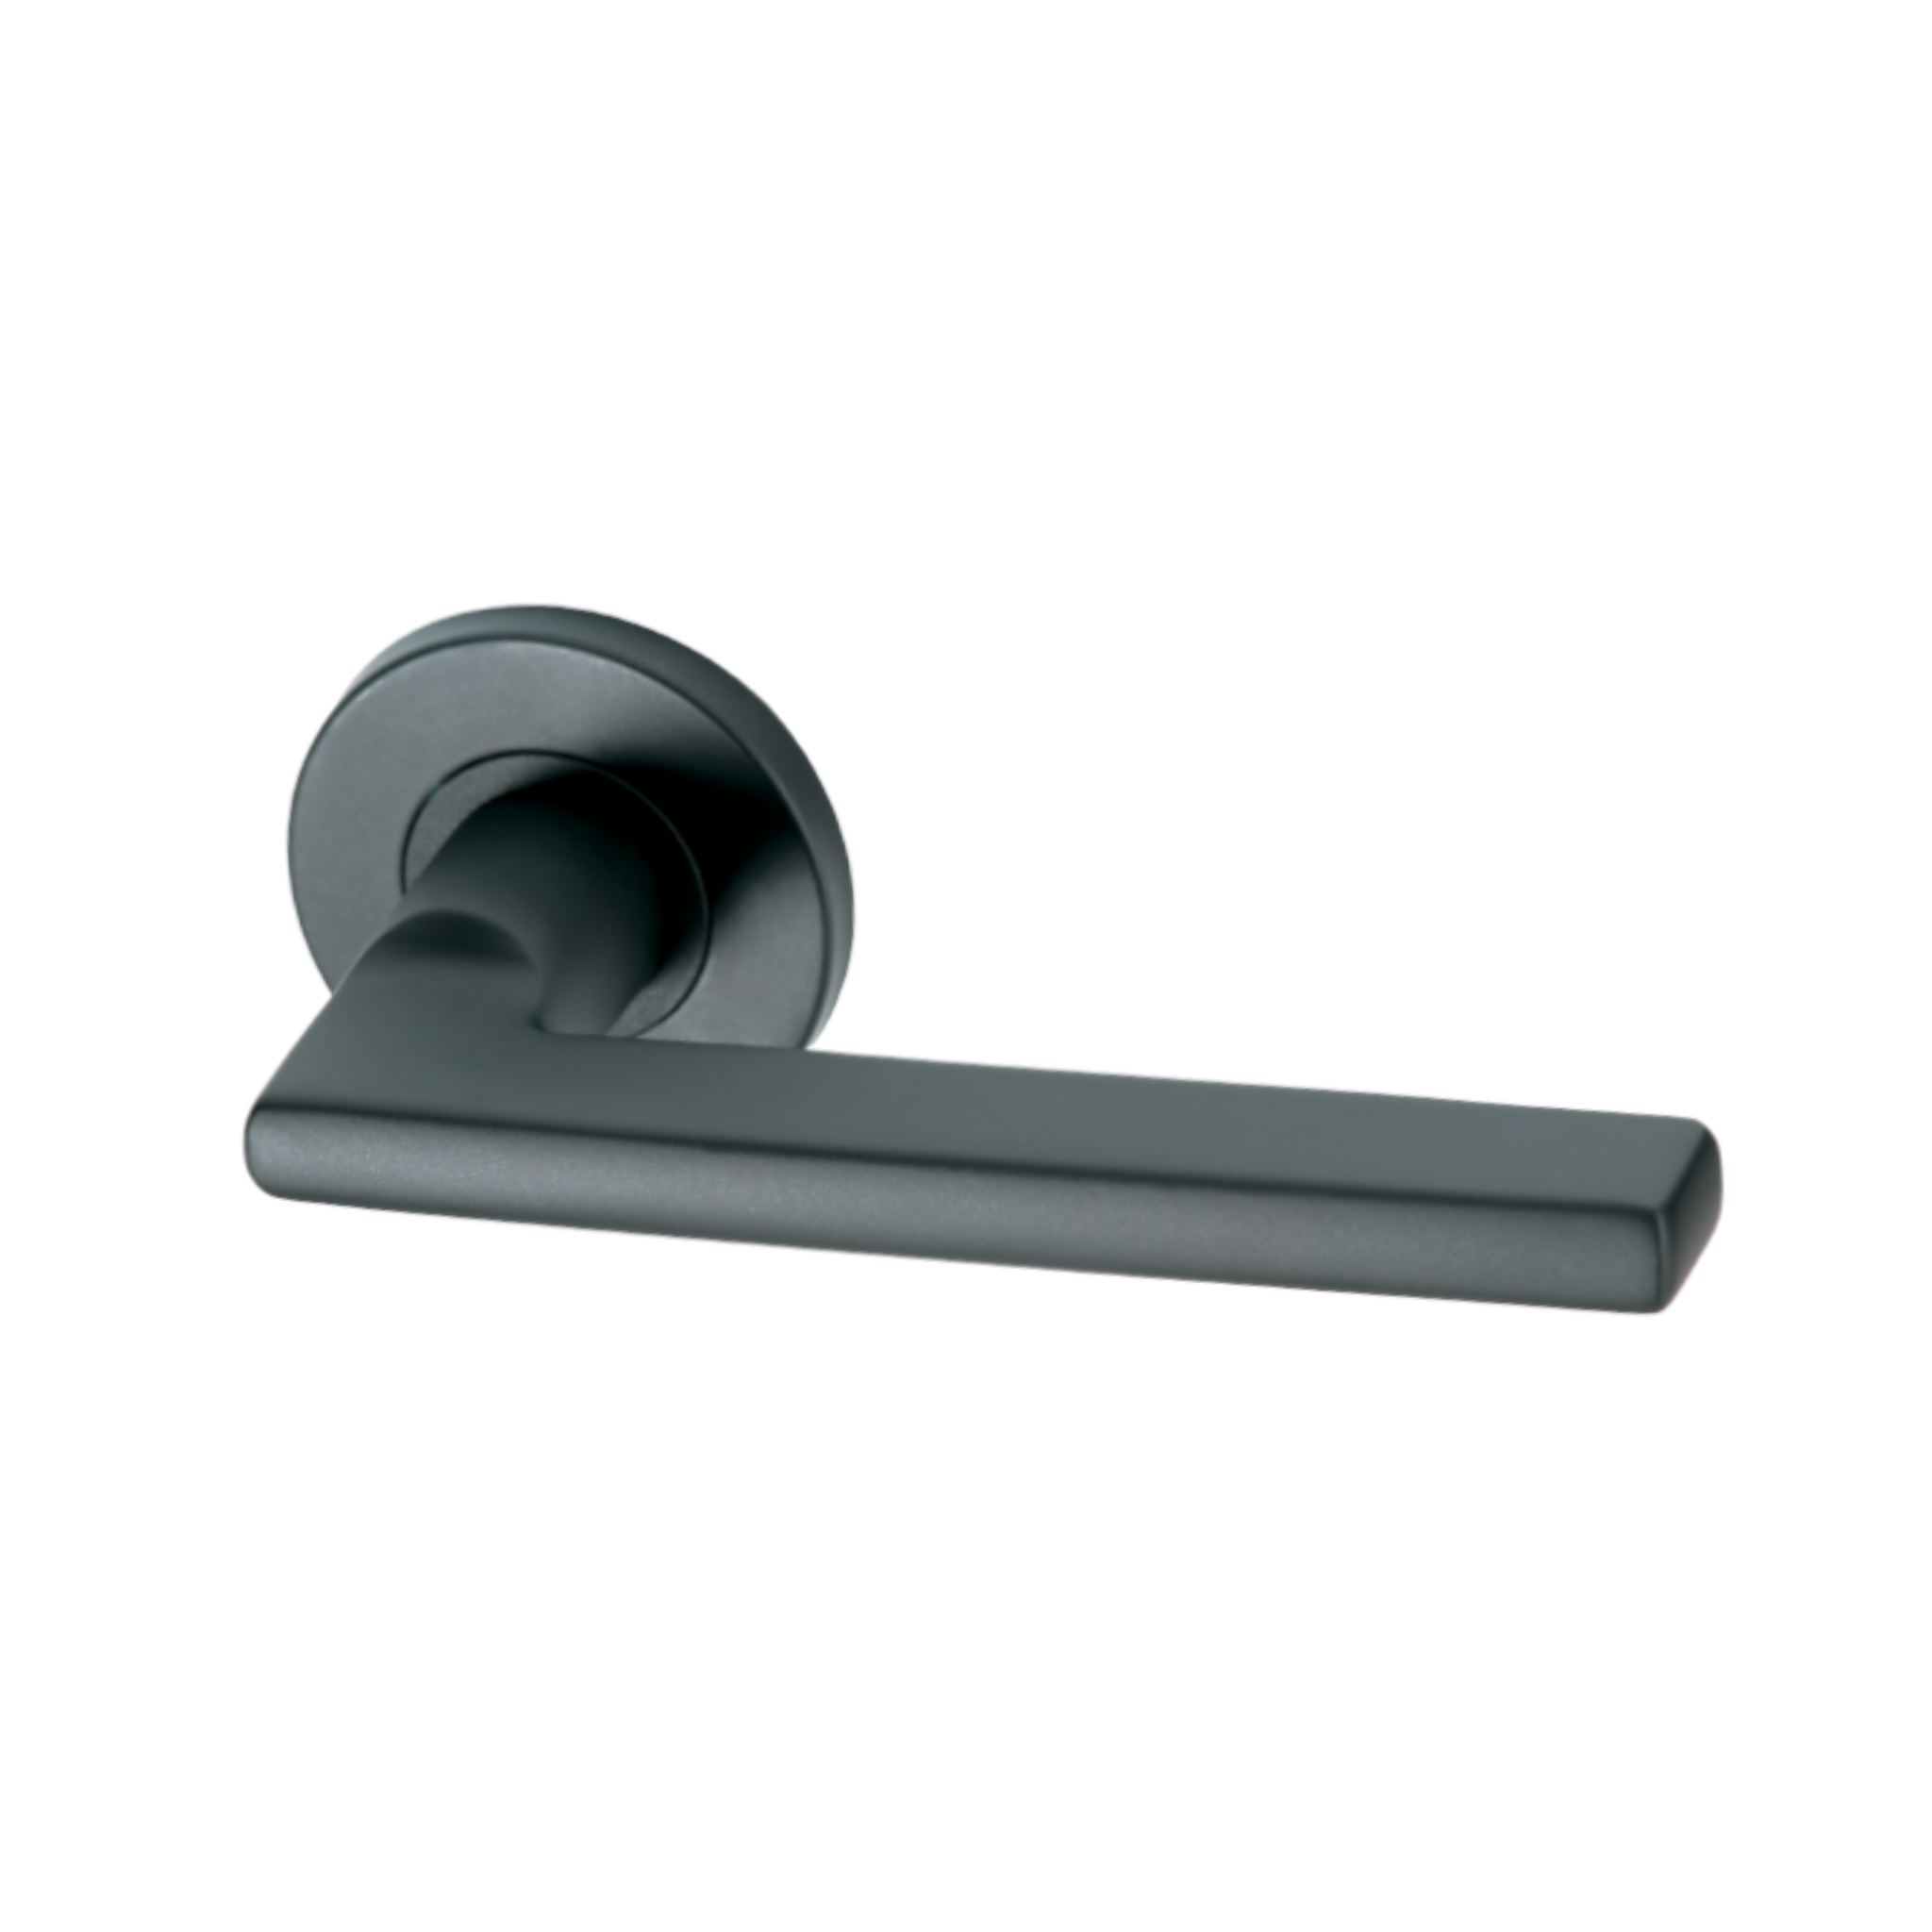 Pello Black, Lever Handle, Mork Range Form, On Round Rose, With Escutcheons, Black Stainless Steel, QS